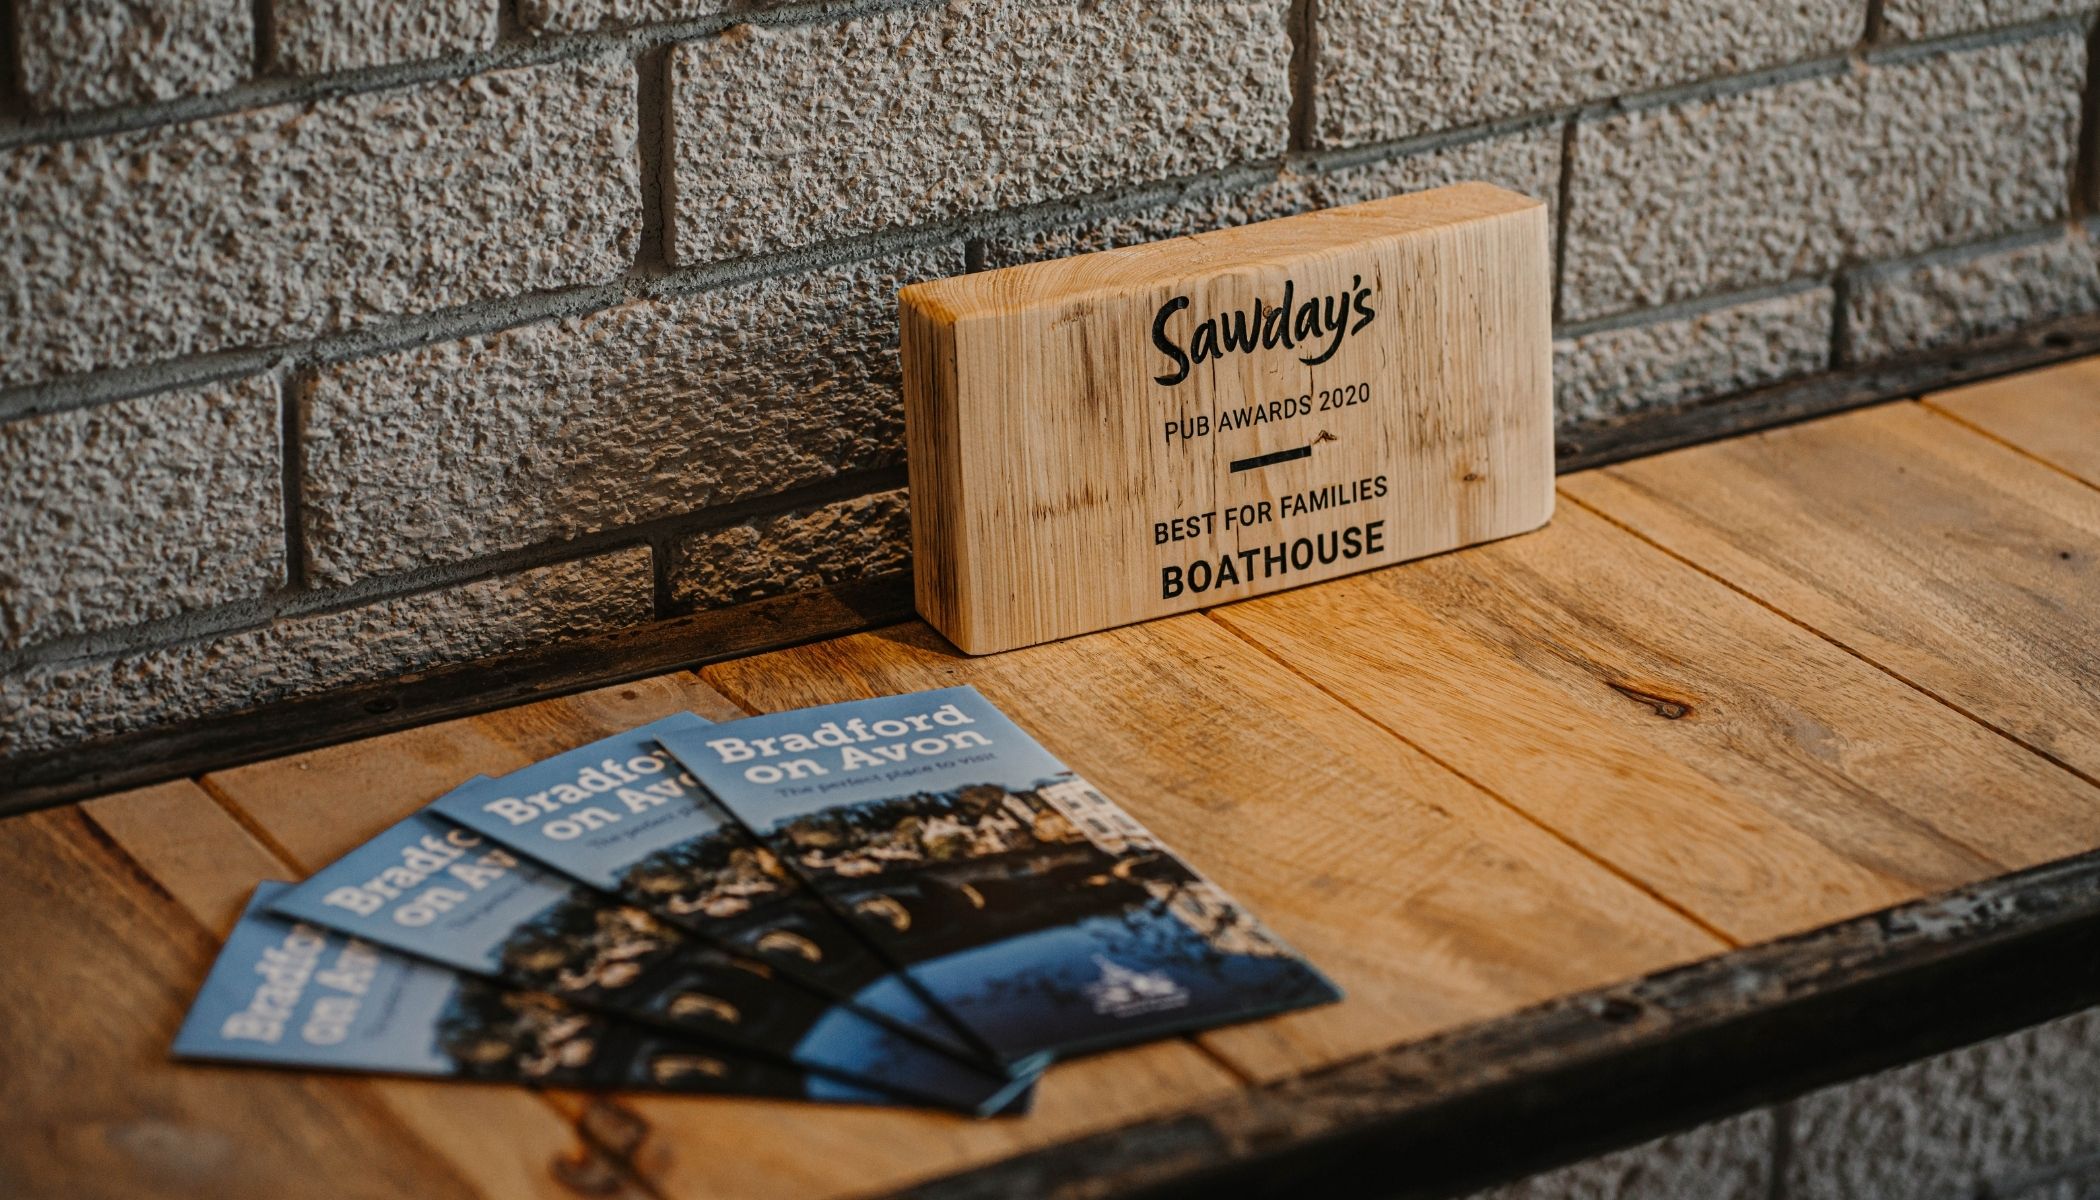 'Best For Families' Sawday's Pub Award 2020 